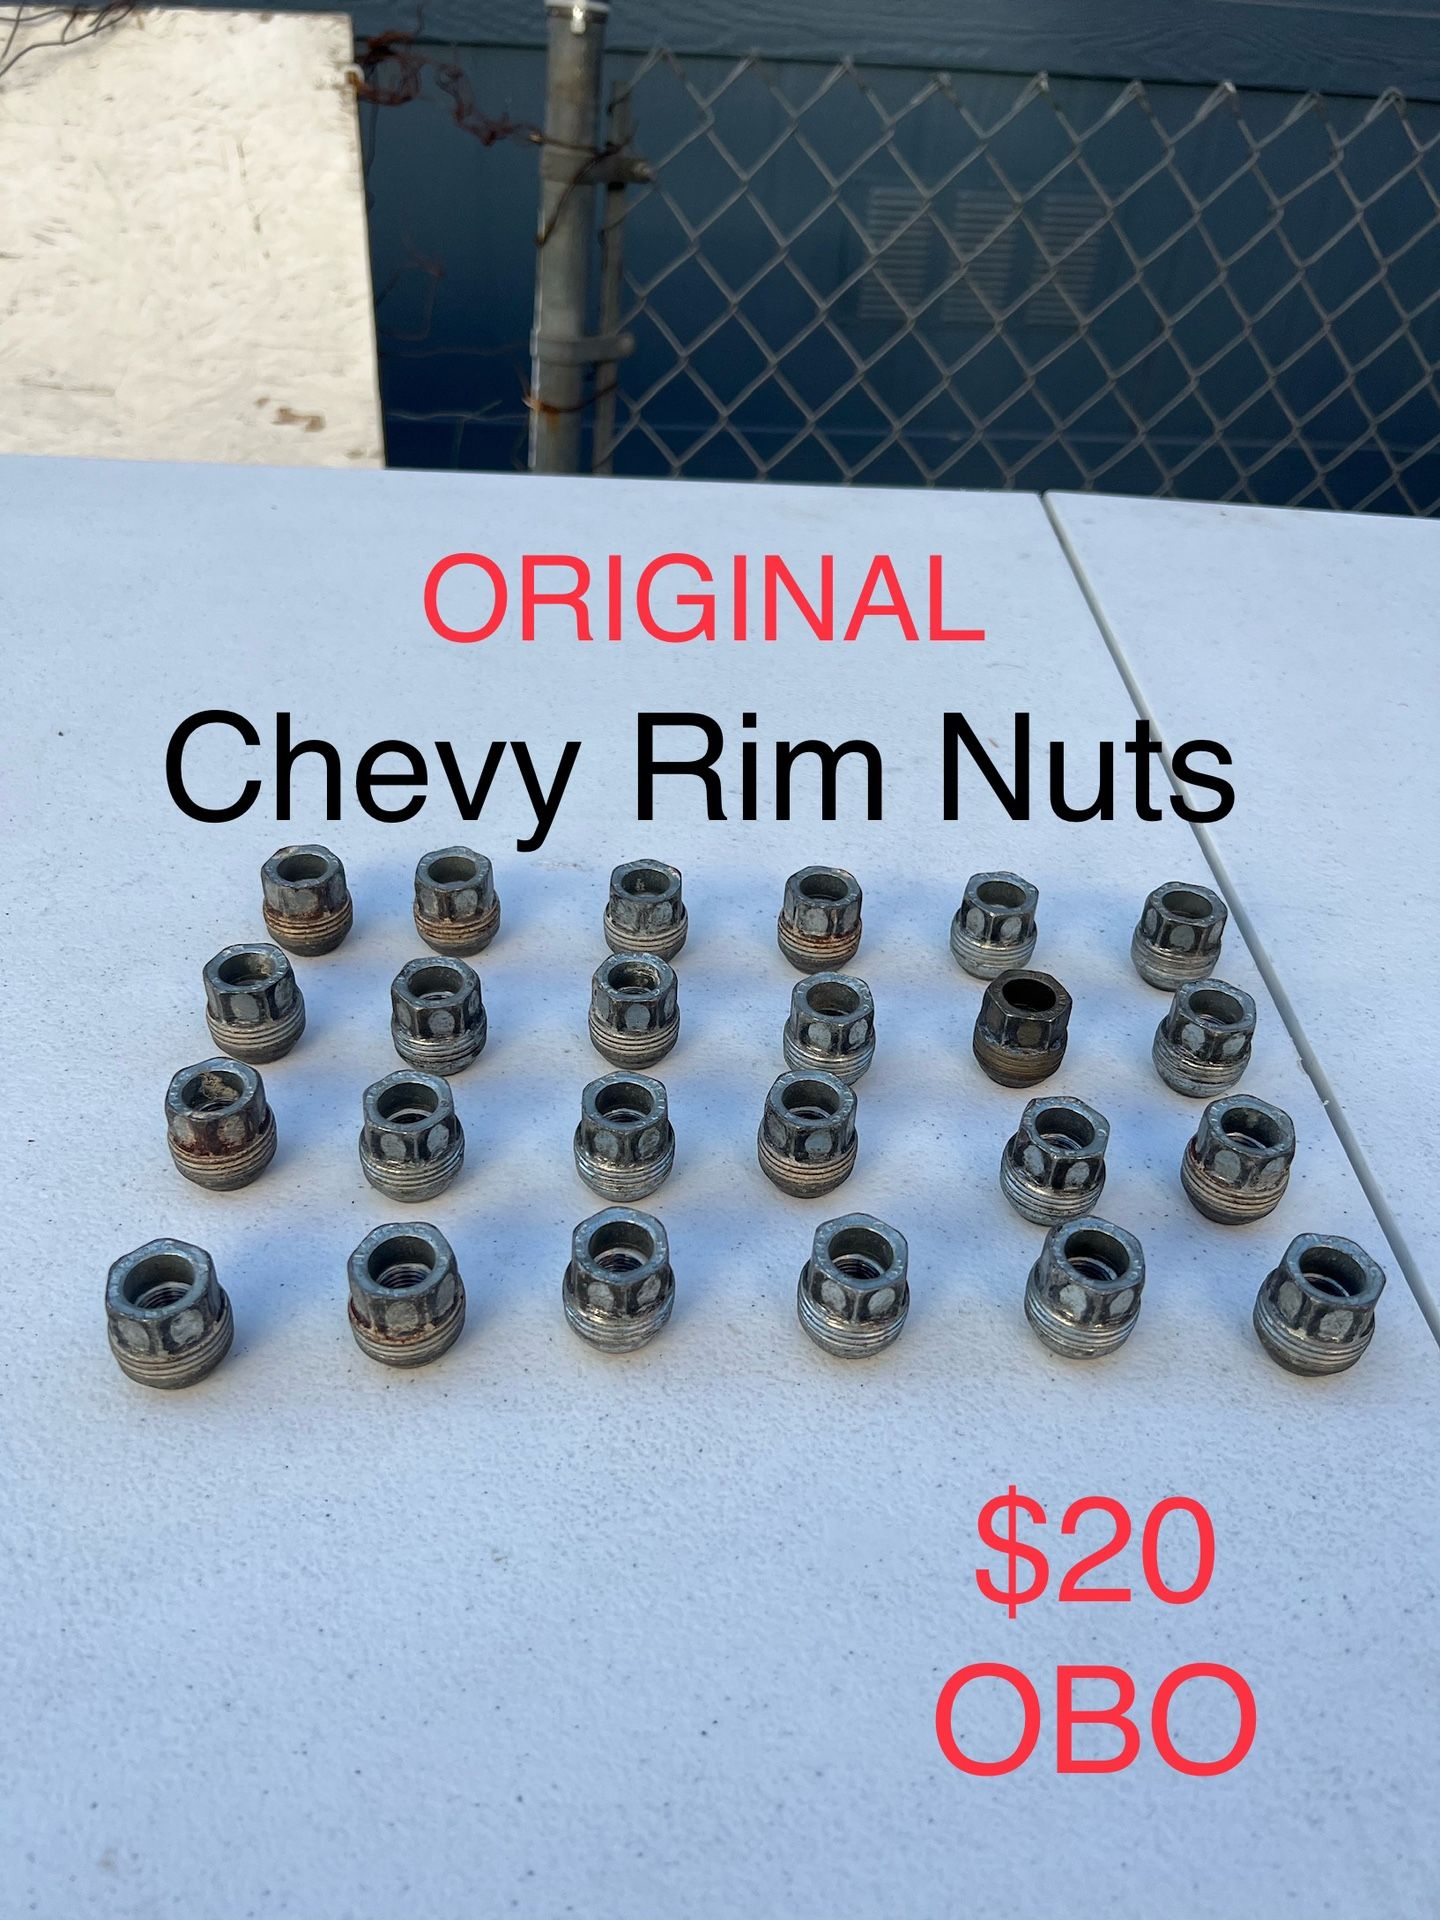 Chevy Rim Nuts $20 For ALL